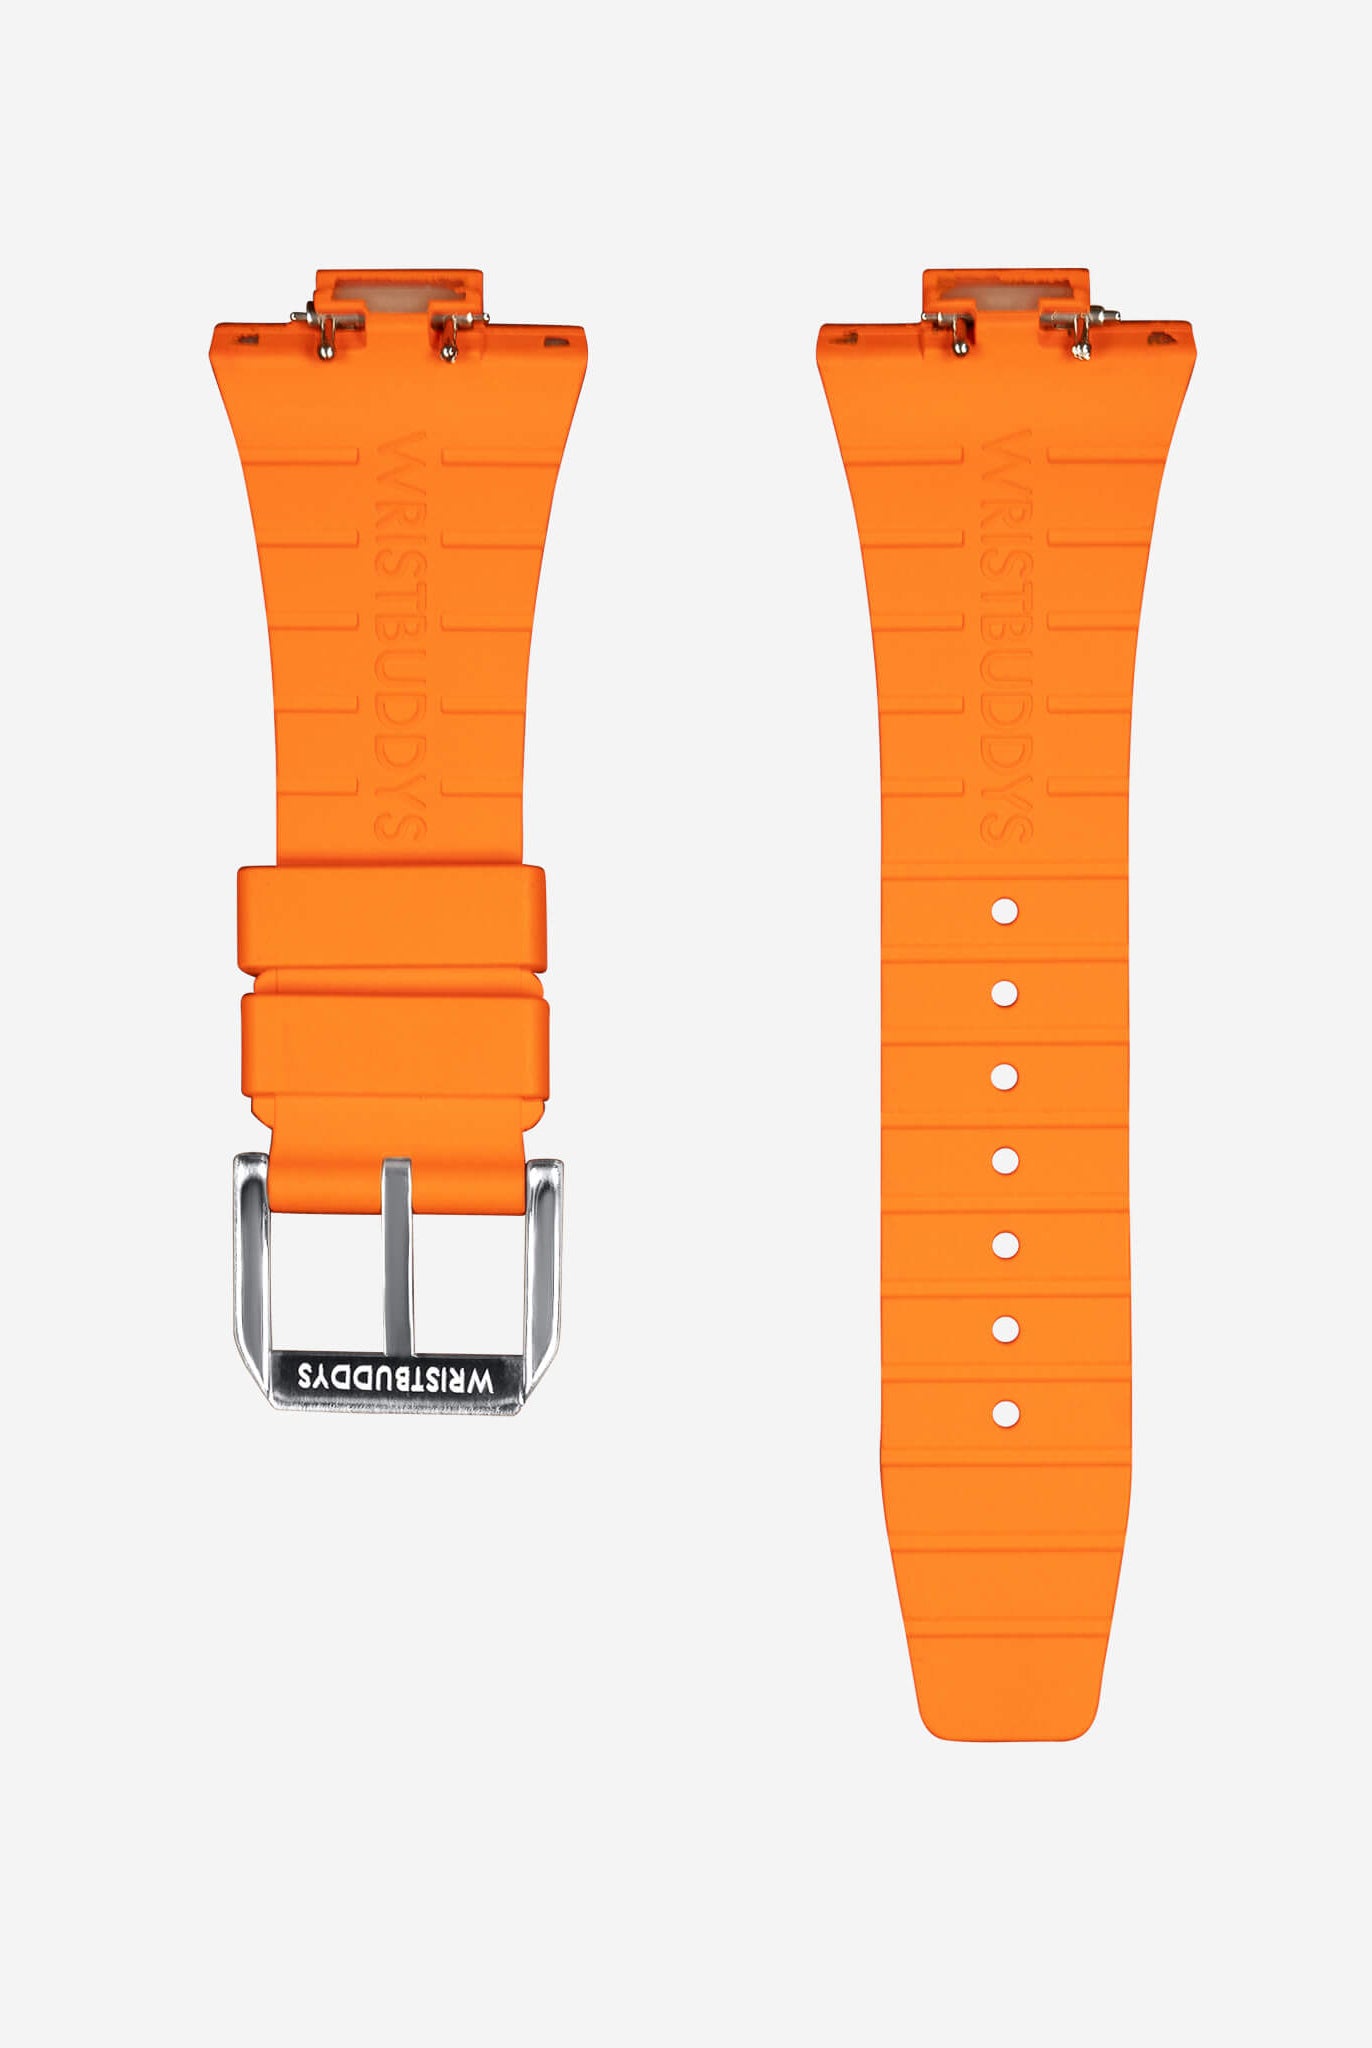  tissot prx straps powermatic 80 rubber perfect fit straps for tissot prx replacement Bracelet alternatives Aftermarket bands Custom straps Wristband choices Rubber band collection upgrades High-quality bands Watch accessories Strap Watchband orange 